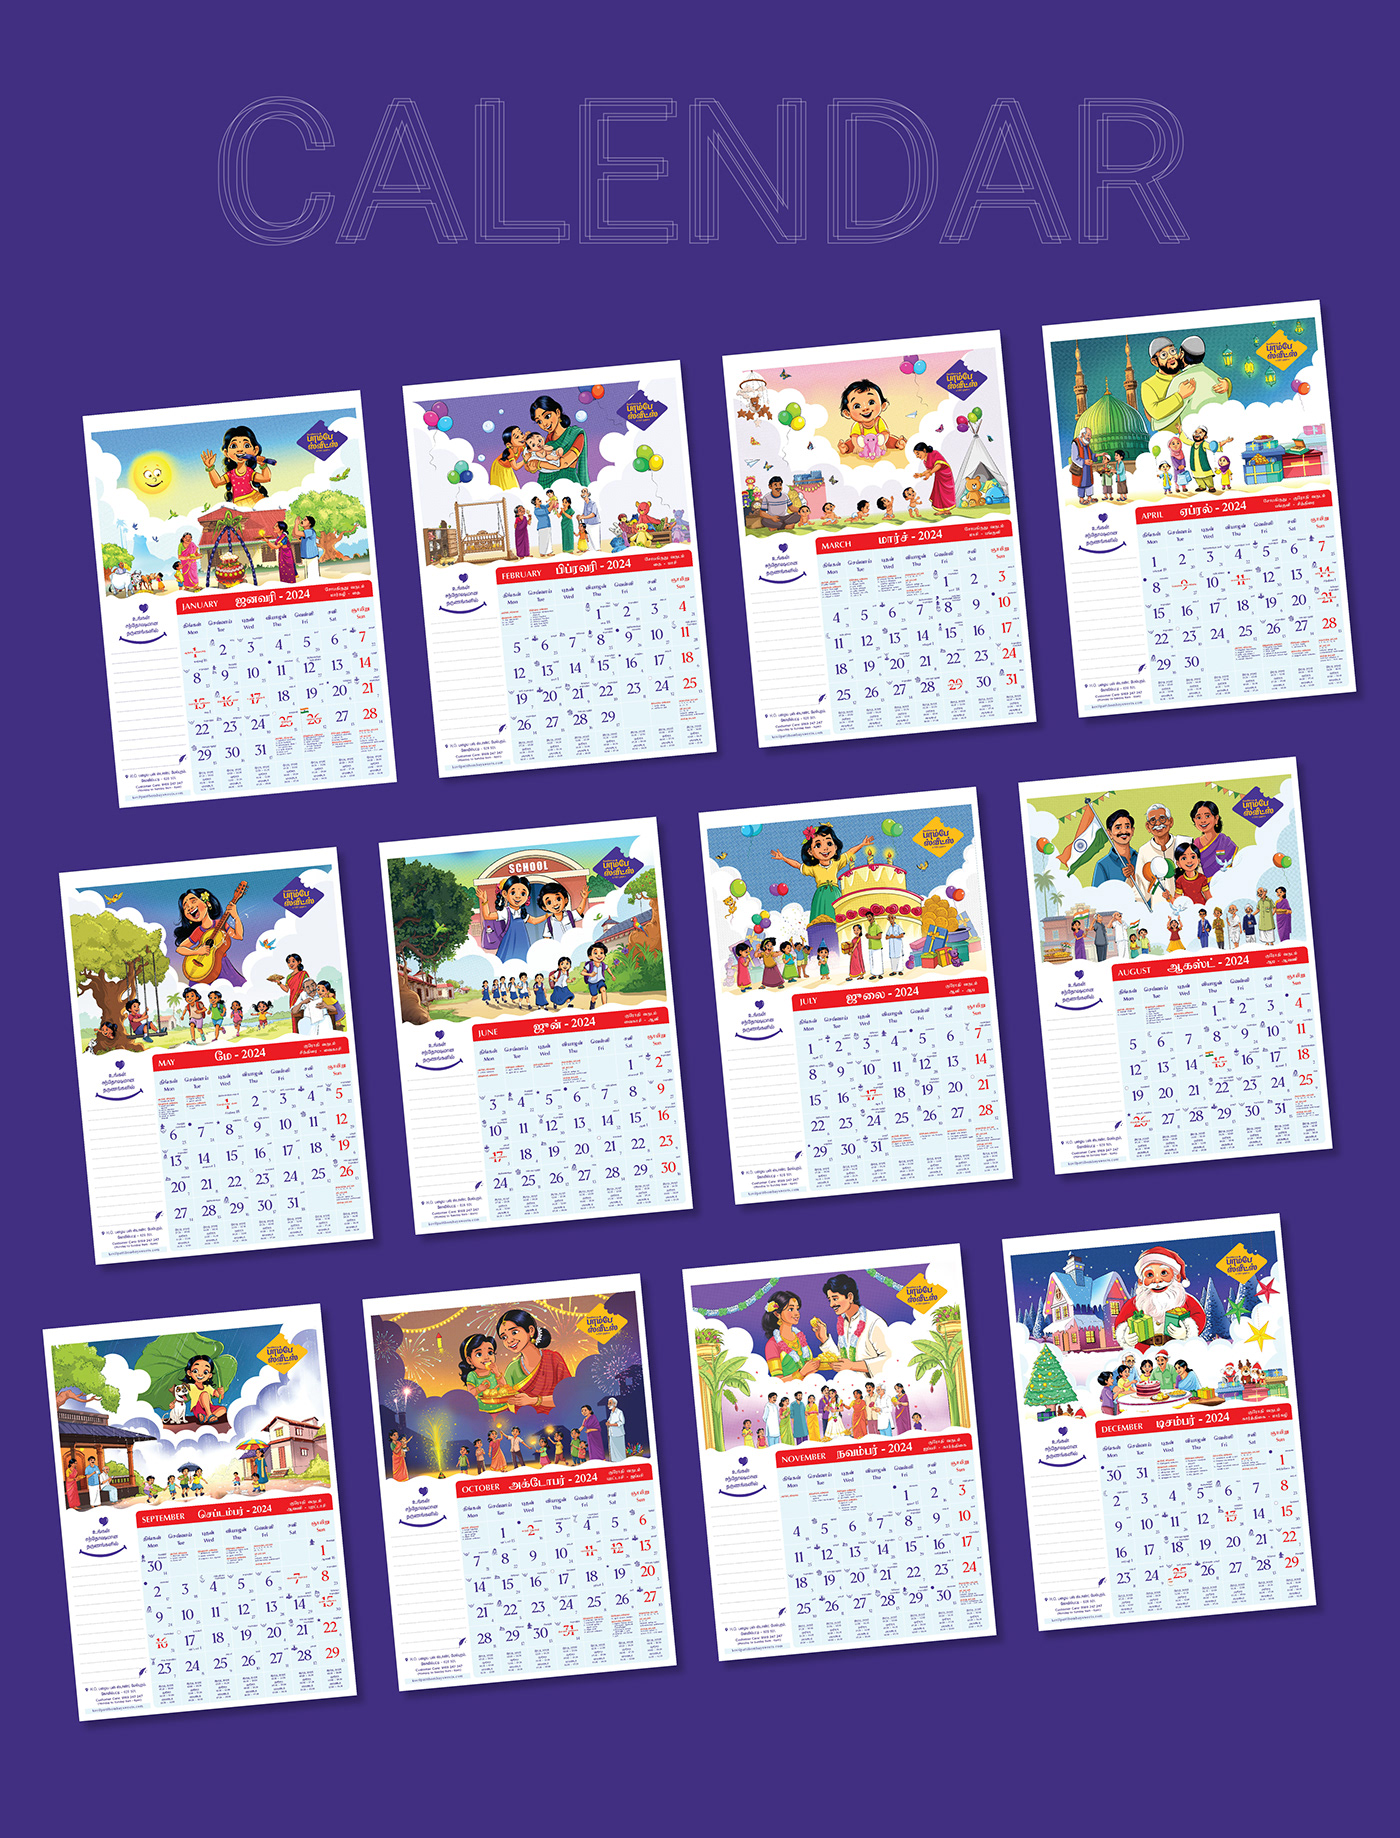 happy moments 2024 calendar comical bombay sweets kovilpatti South Indian Concept to Print conceptual calendar engaging design Real life illustrations